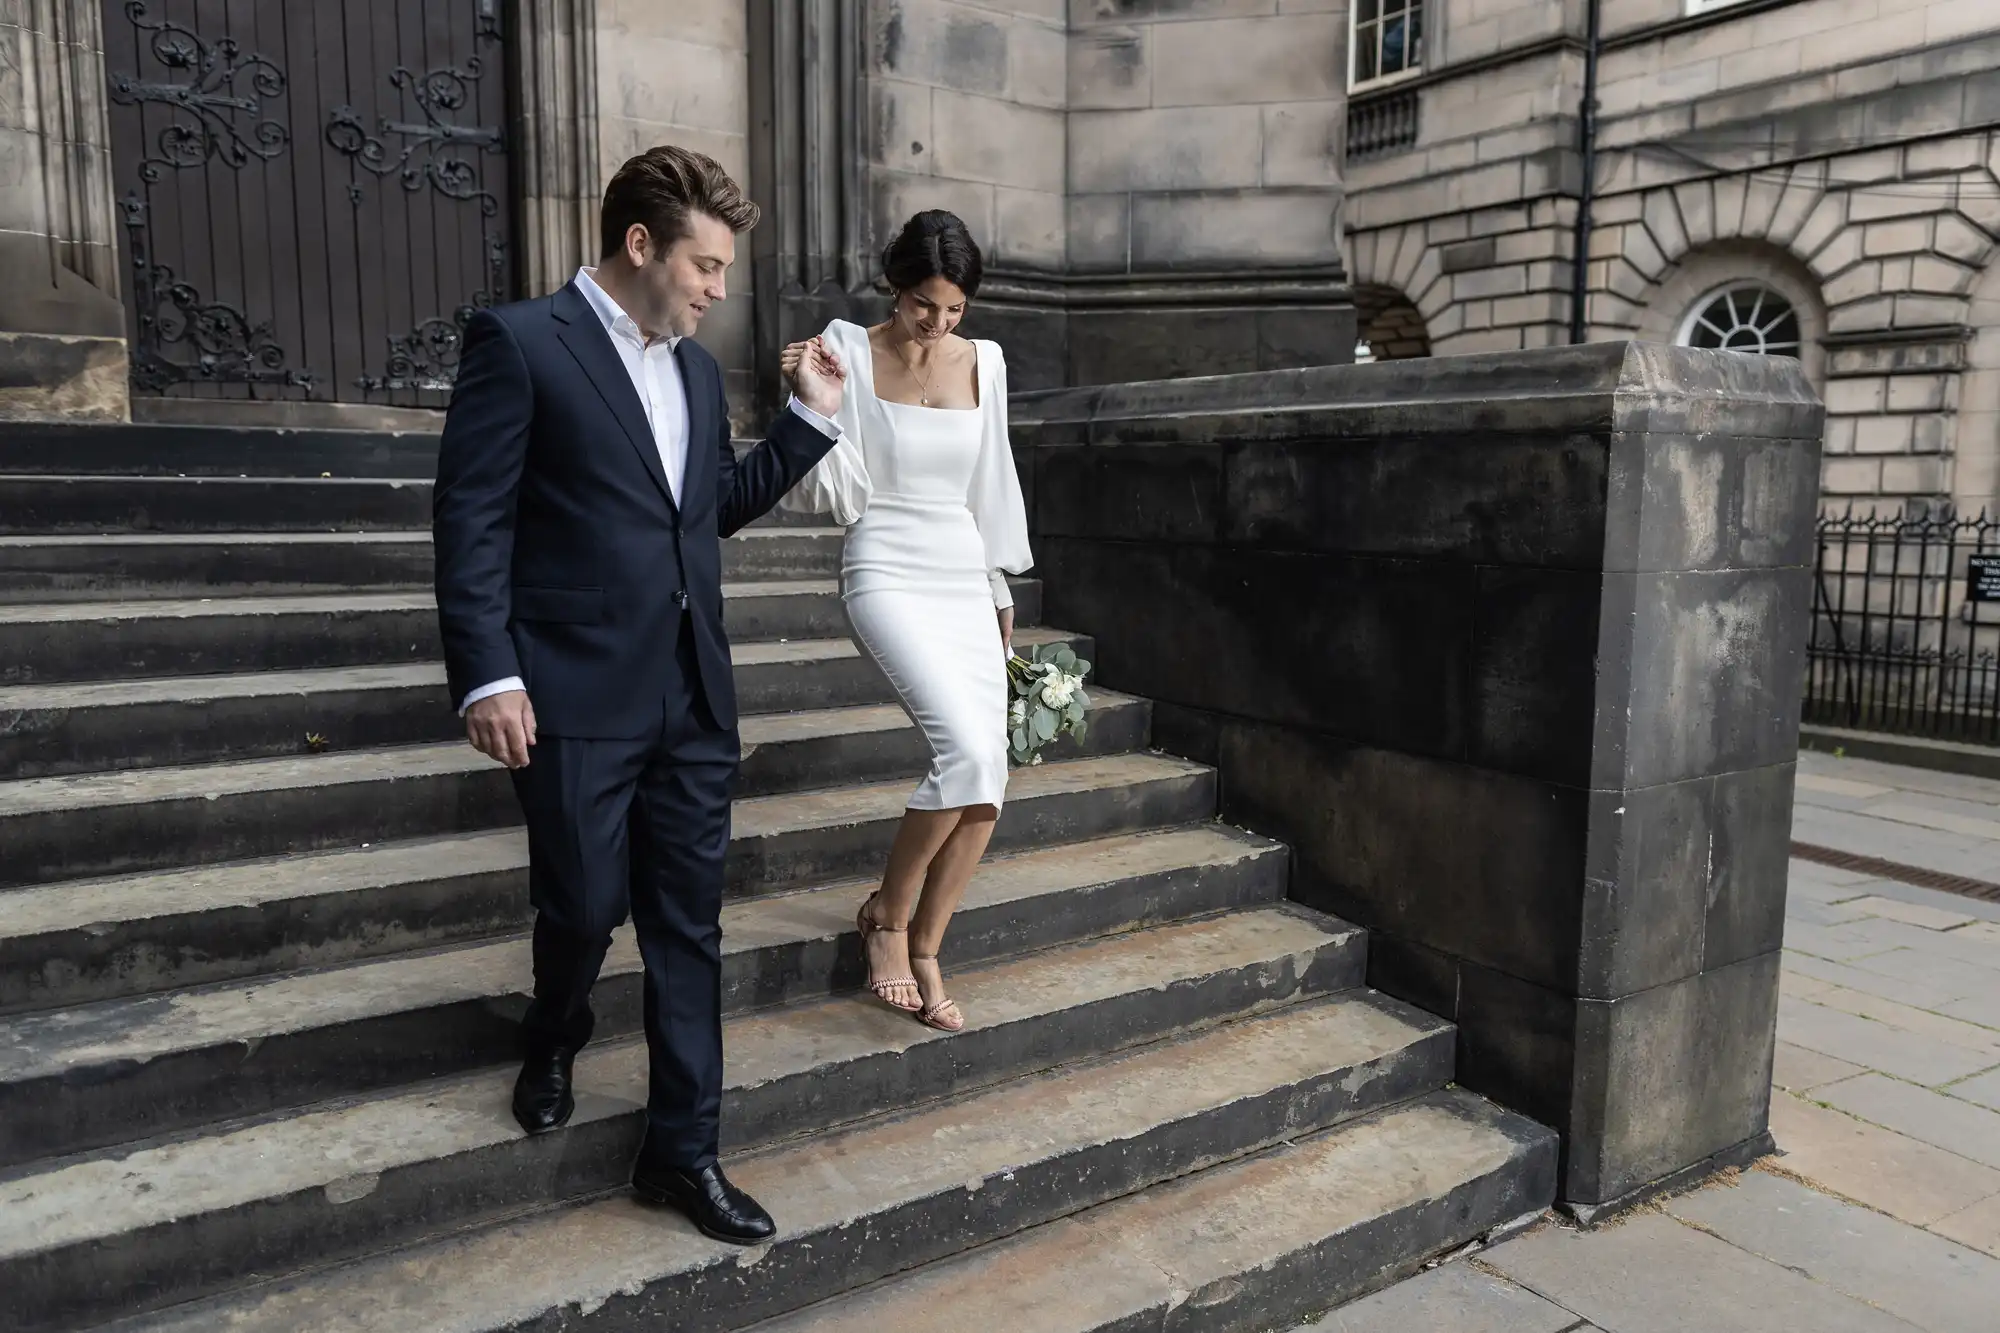 A man in a suit and a woman in a white dress walk down steps outside a building, the woman holding her shoes.